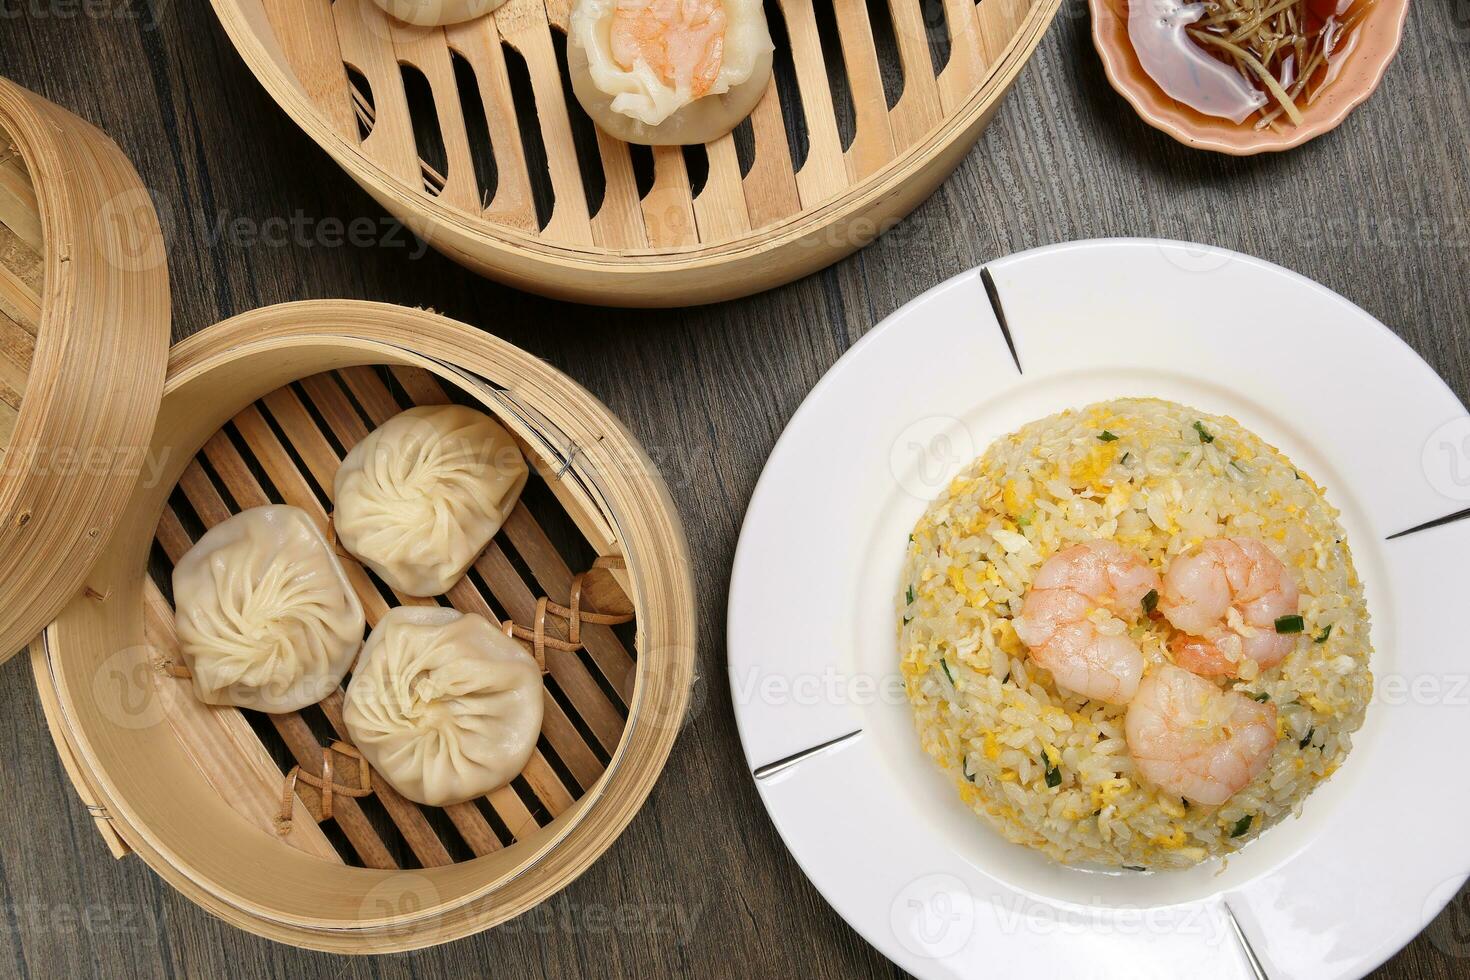 Prawn shrimp shaomai Xiao long bao dim sum dumpling chicken prawn fish seafood vegetable in bamboo steamer fried rice on plate sauce chopsticks soup spoon over rustic background photo